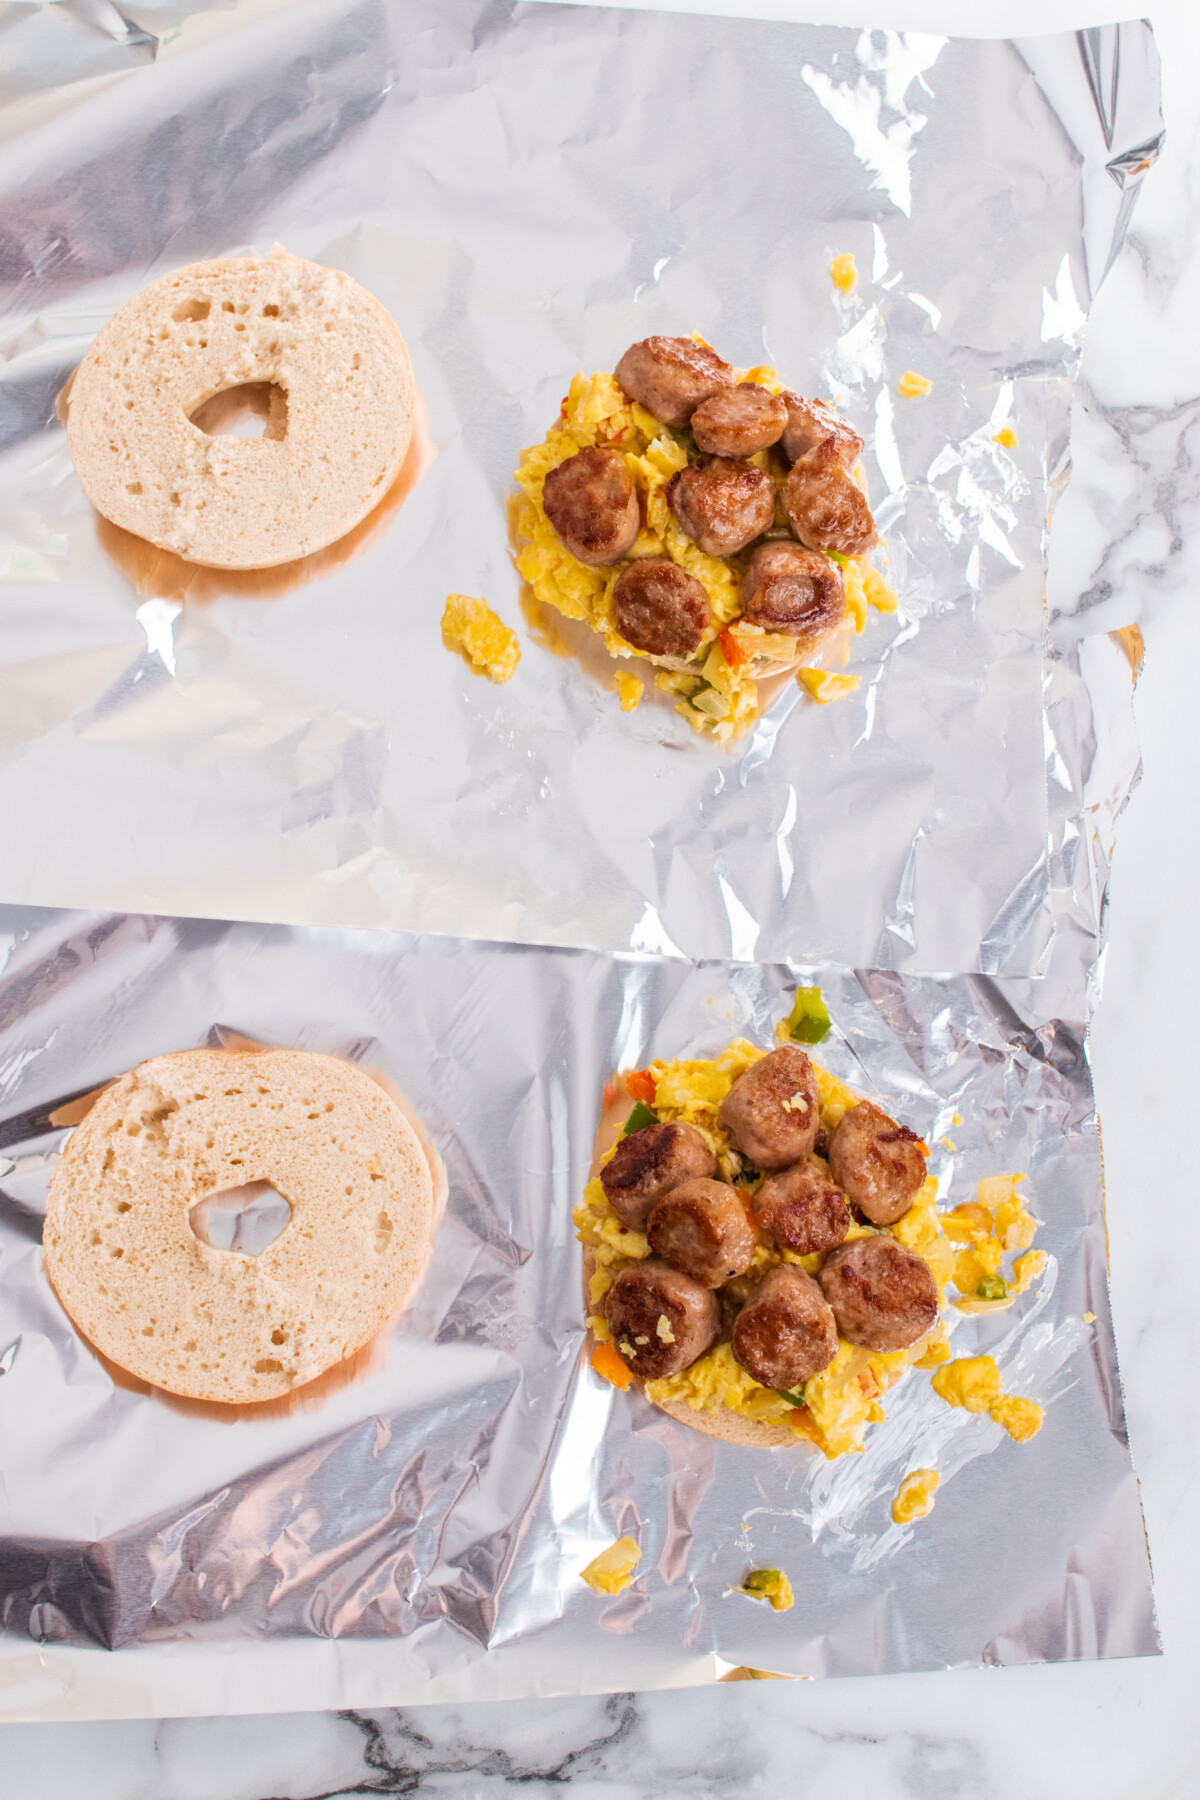 Homeland - Grocery & Pharmacy in Oklahoma - Recipe: Sausage, Egg and Cheese  Breakfast Bagel